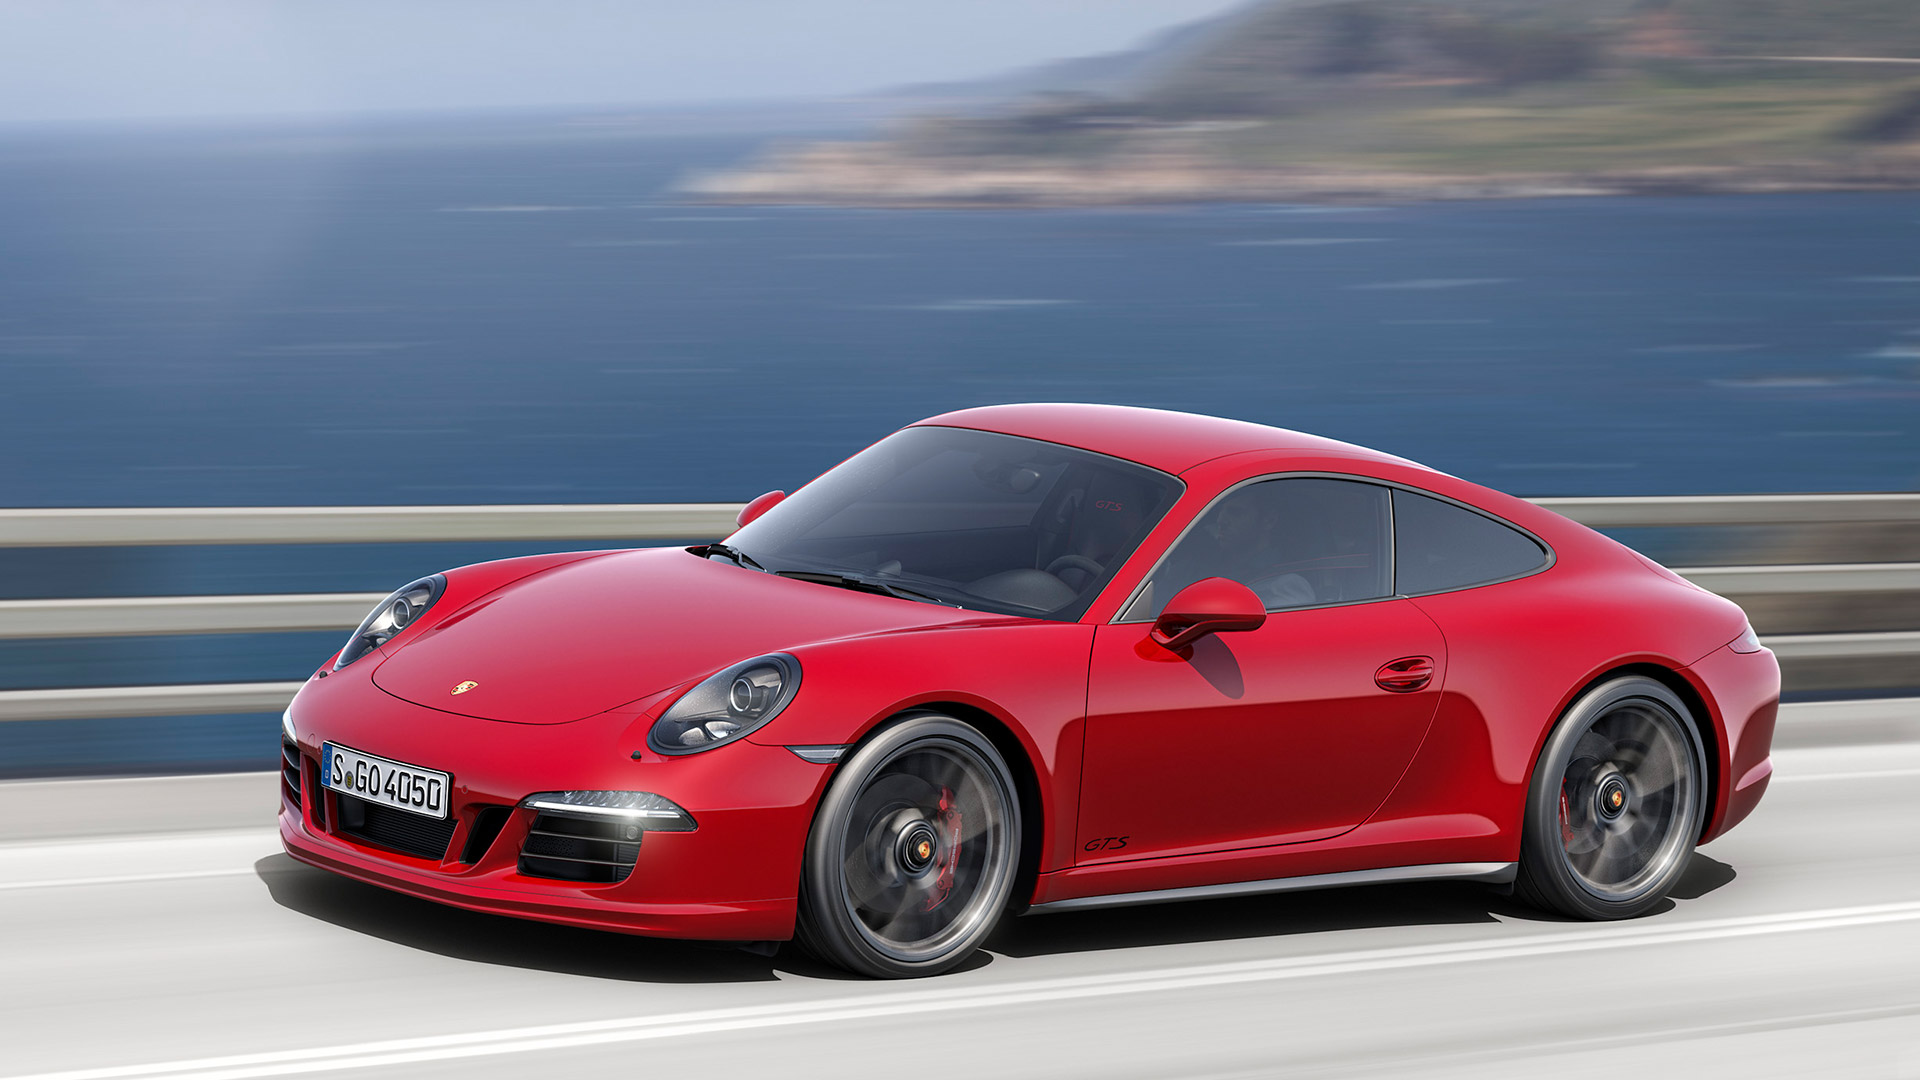 Porsche 911 2015 Carrera S - Price in India, Mileage, Reviews, Colours,  Specification, Images - Overdrive